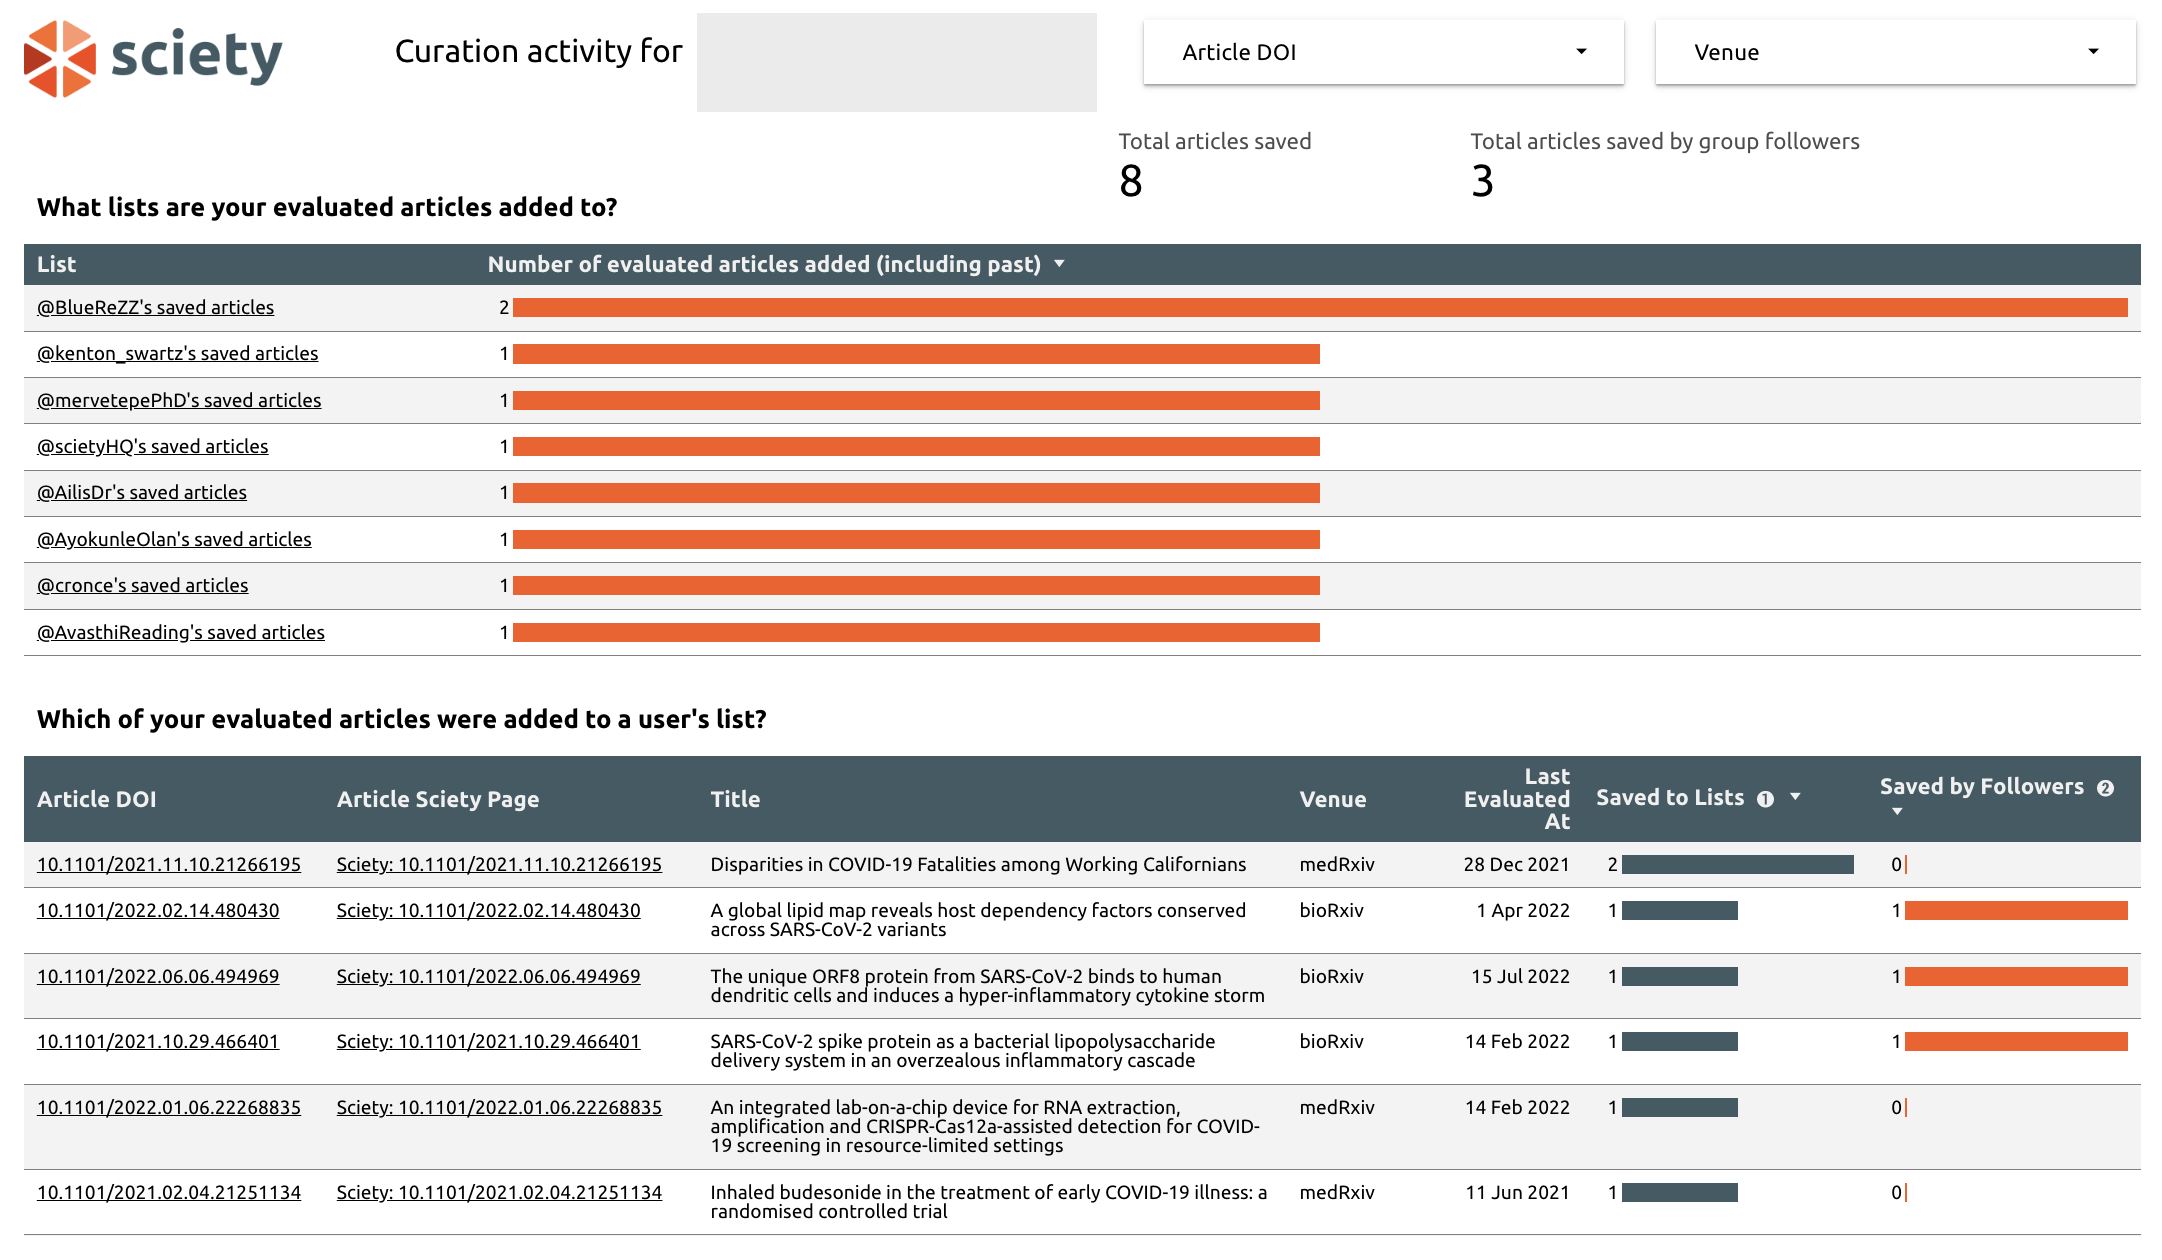 Groups dashboard showing the curation activity of their evaluated articles